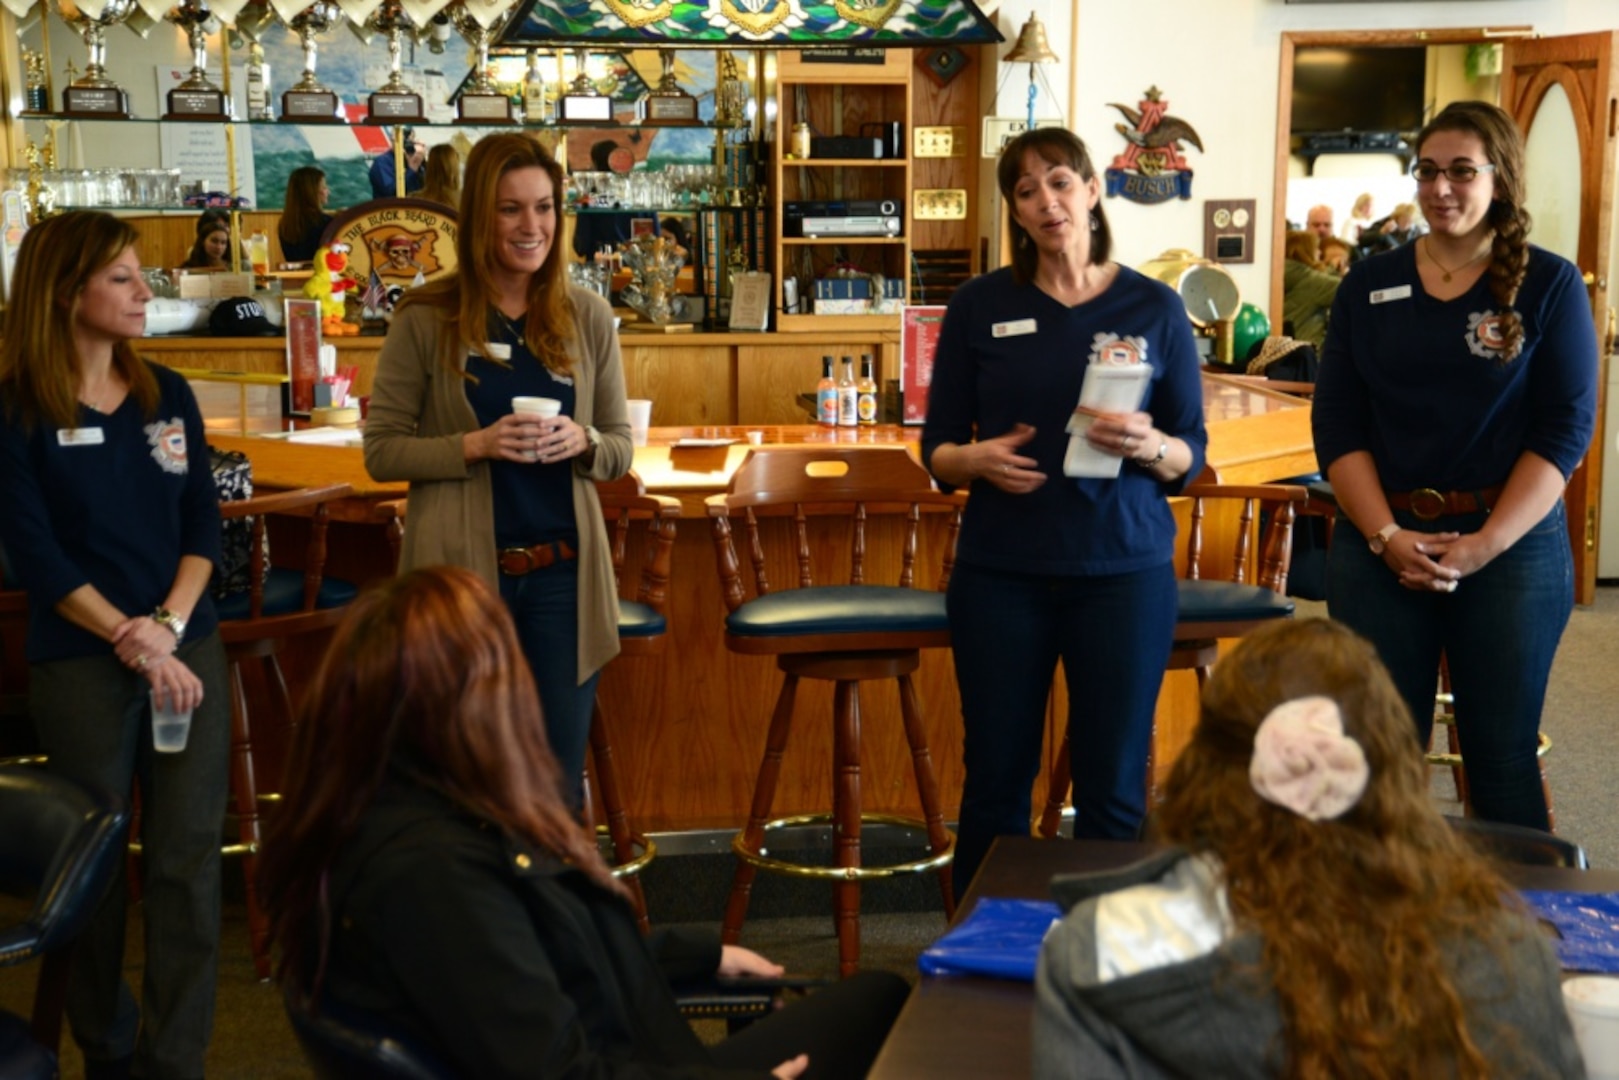 Members of the Guardian Spouses speak with the spouses, or soon-to-be spouses, of graduating recruits from U.S. Coast Guard Training Center Cape May, N.J., Feb. 27, 2015. The Guardian Spouses provide information about military life in a positive and informative way every graduation day. (U.S. Coast Guard photo by Chief Warrant Officer John Edwards)